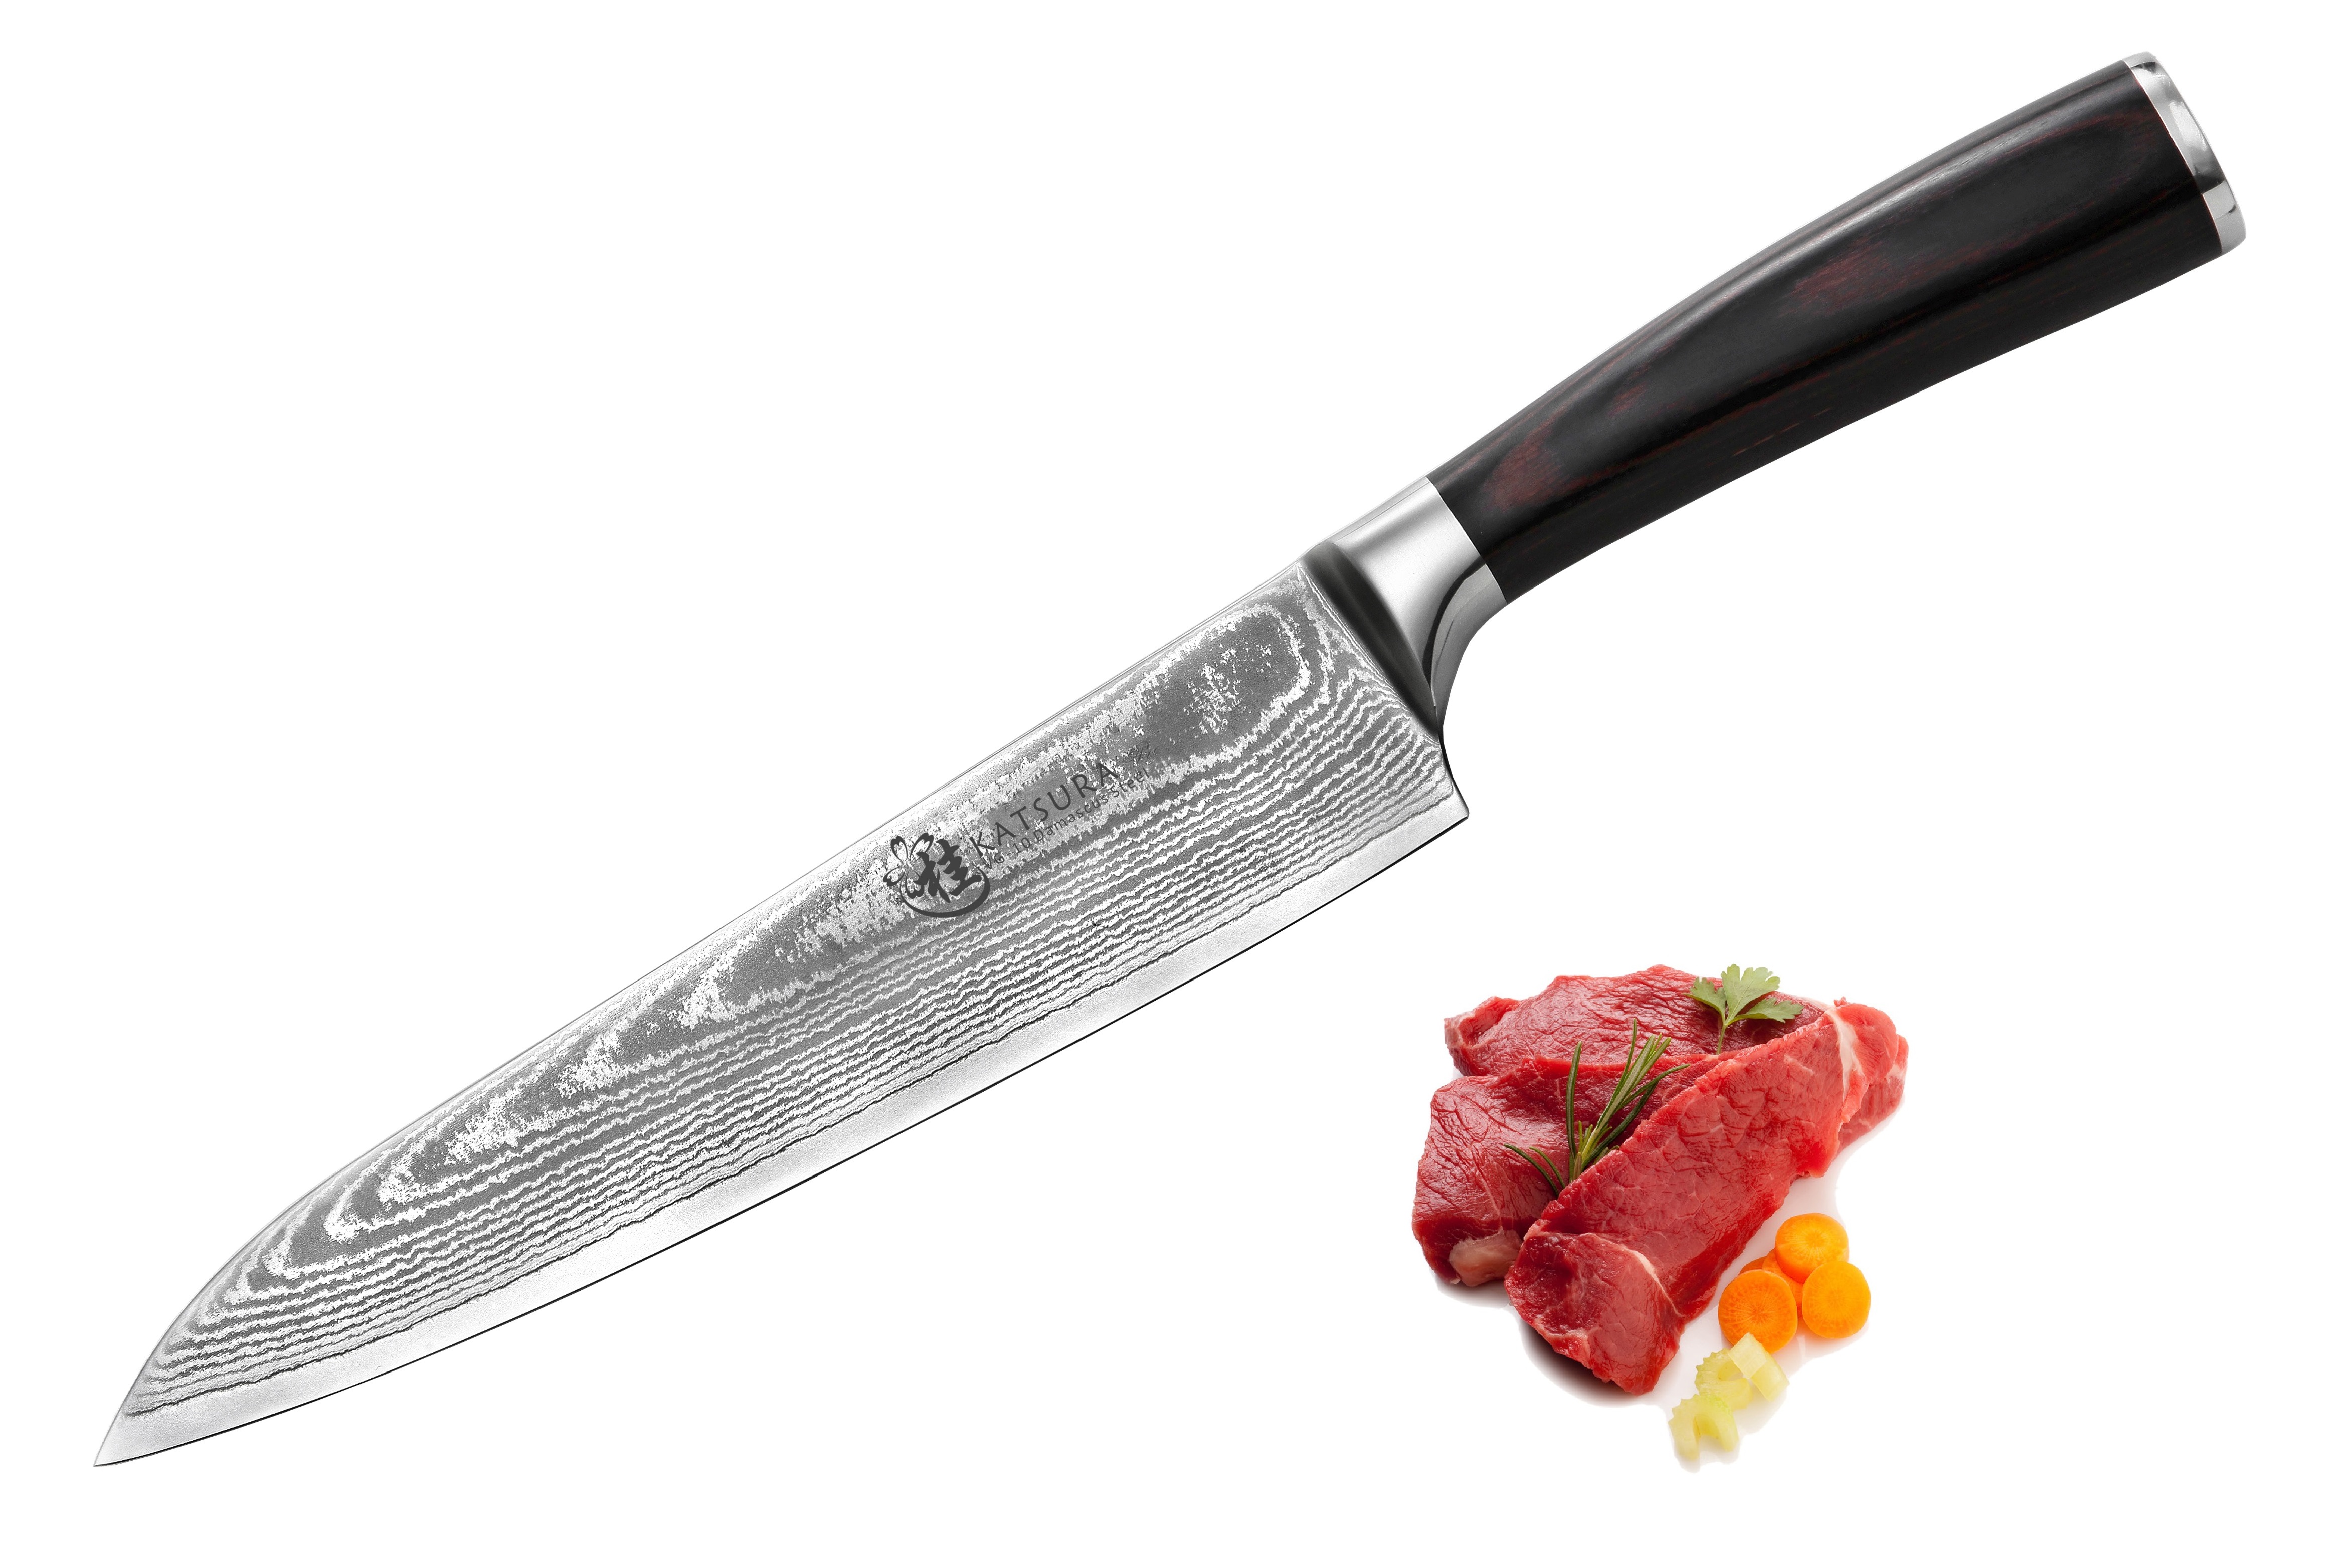 Kd10p 8 In. Japanese Vg-10 67 Layers Damascus Steel Gyutou Chef Knife